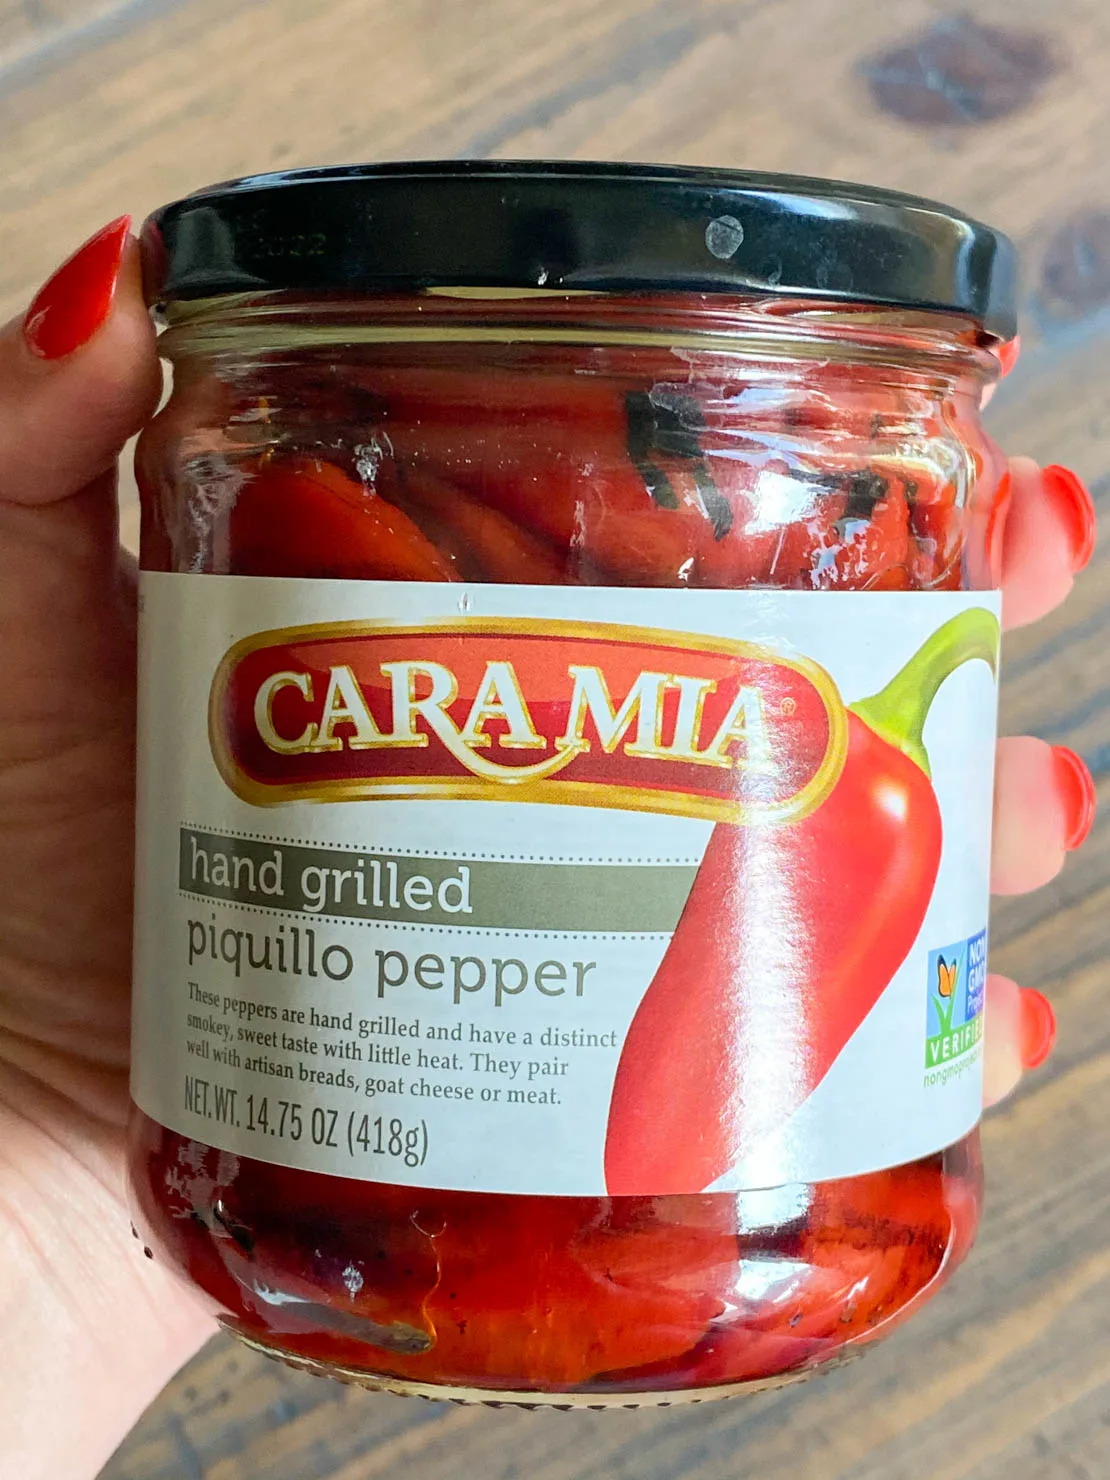 A jar of grilled piquillo peppers